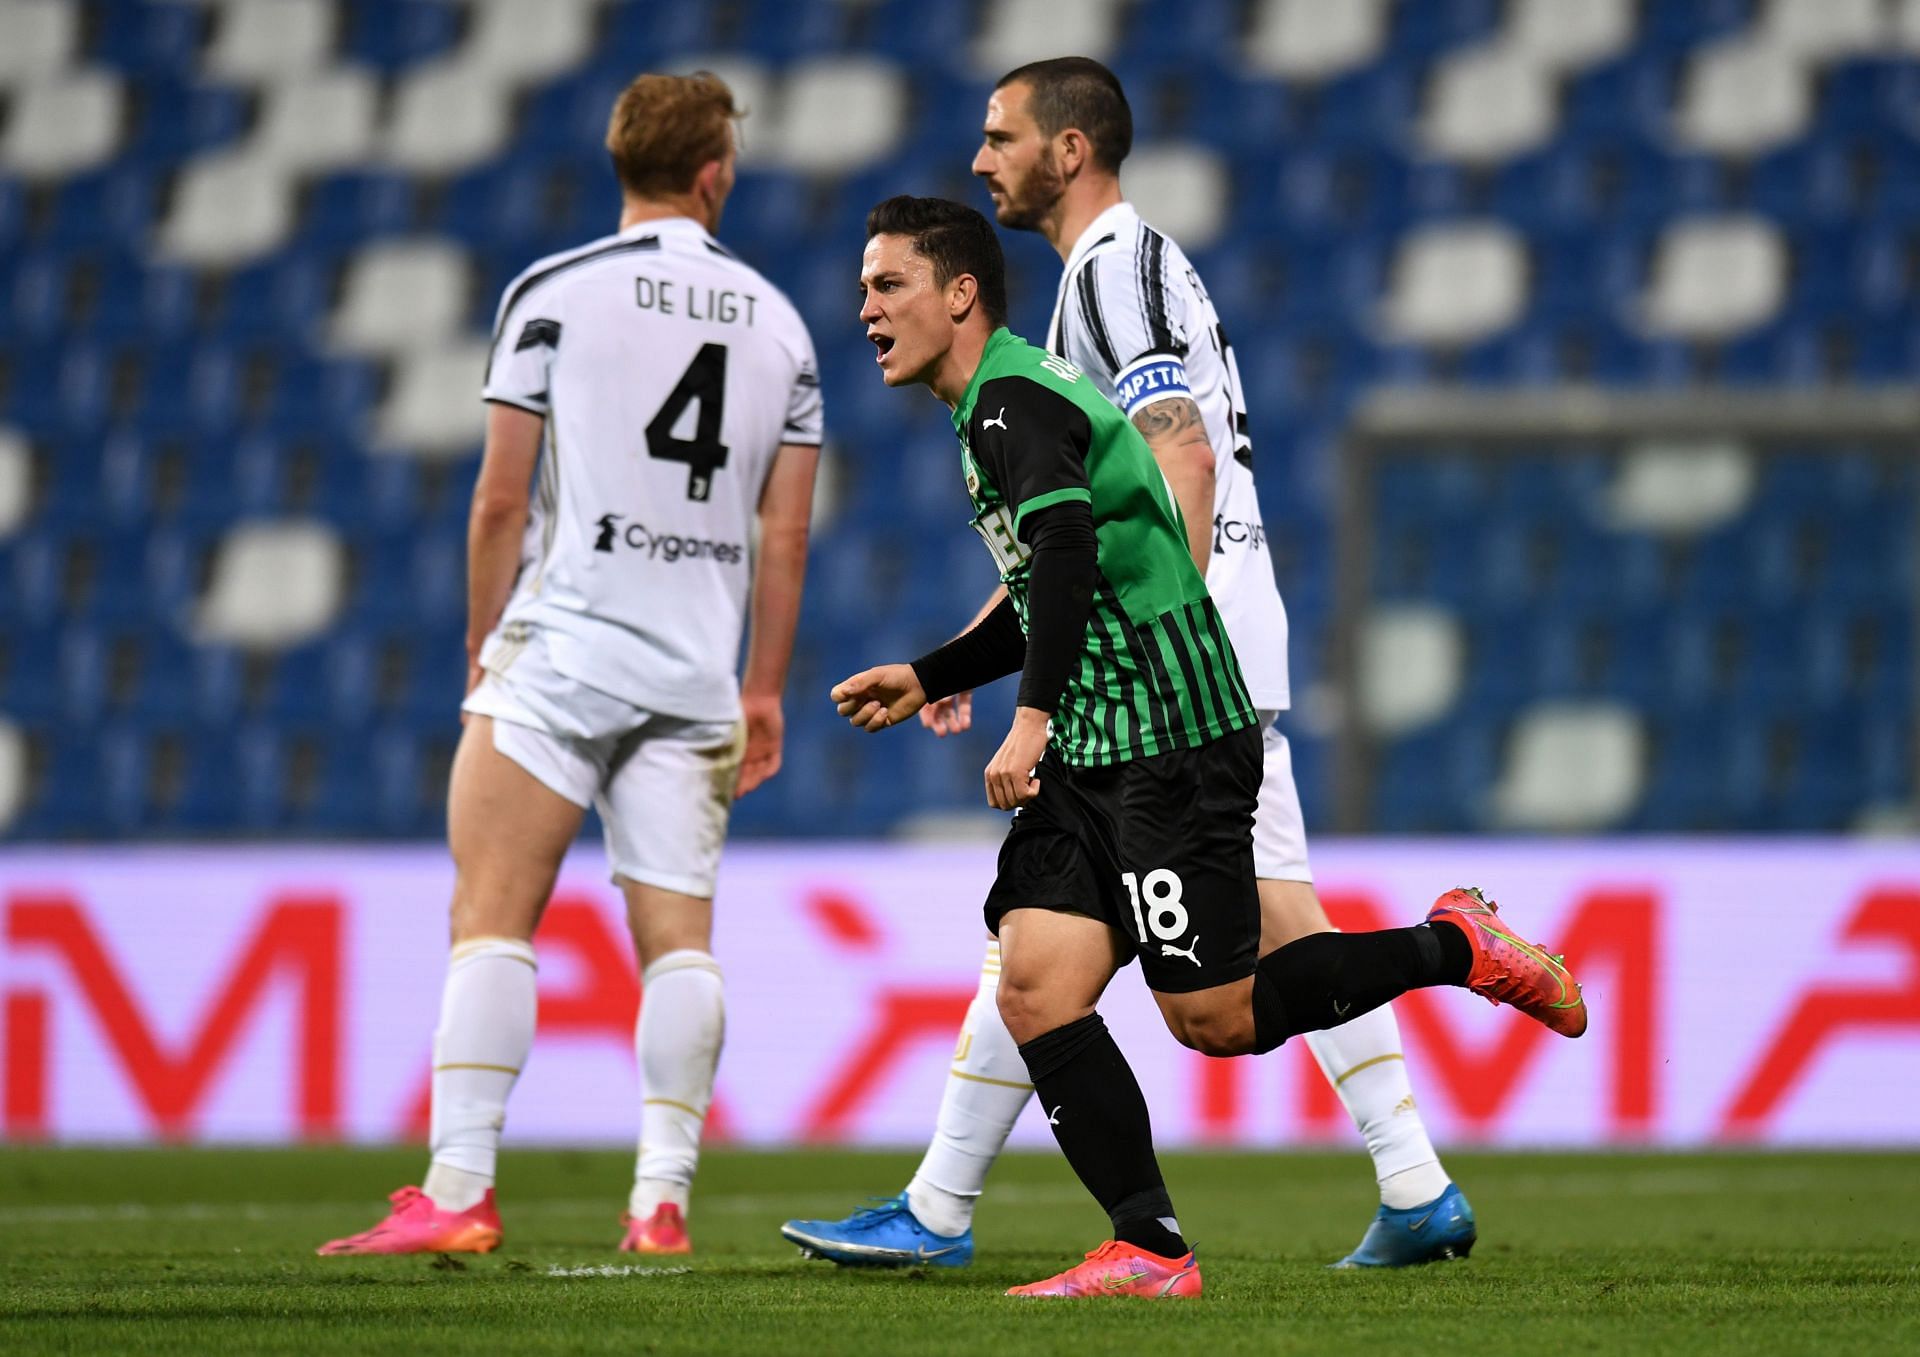 Juventus and Sassuolo square off in a Coppa Italia quarter-final fixture on Thursday